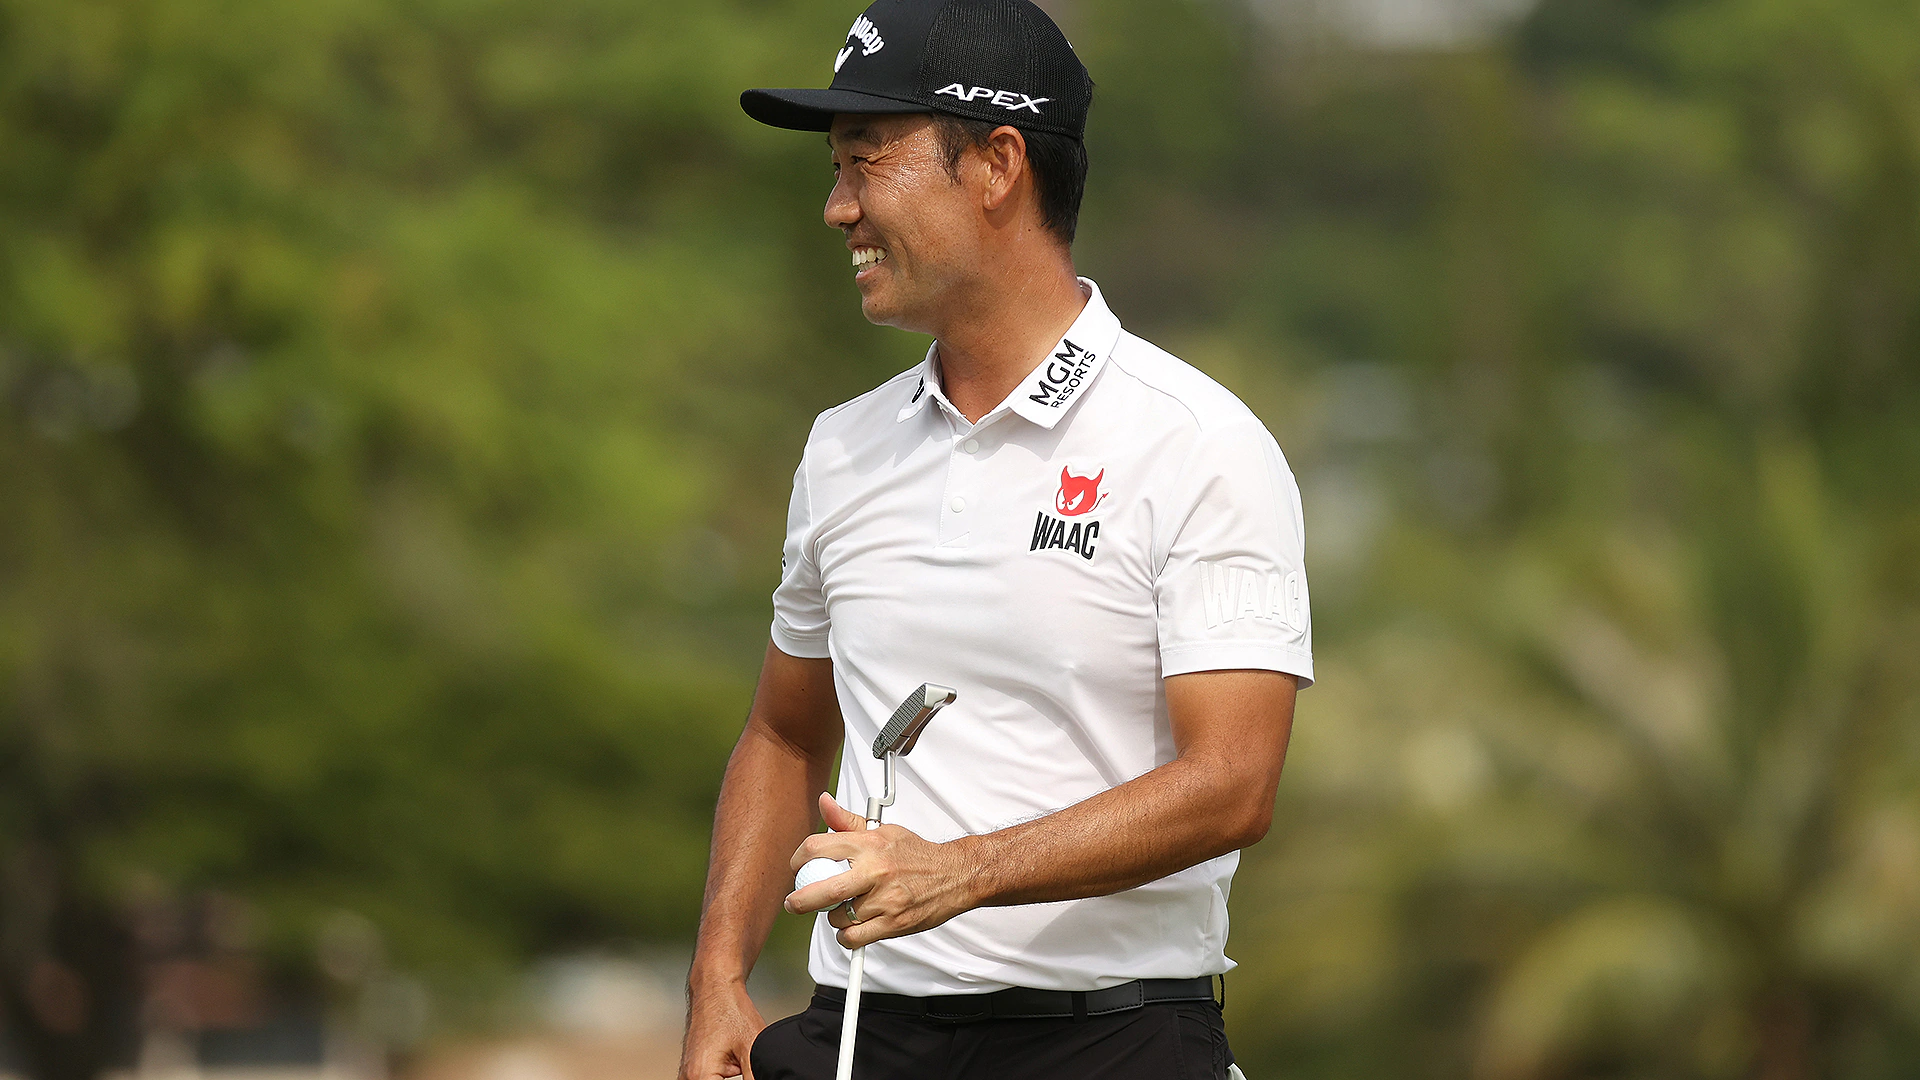 Kevin Na wins after avoiding third straight Sony Open WD